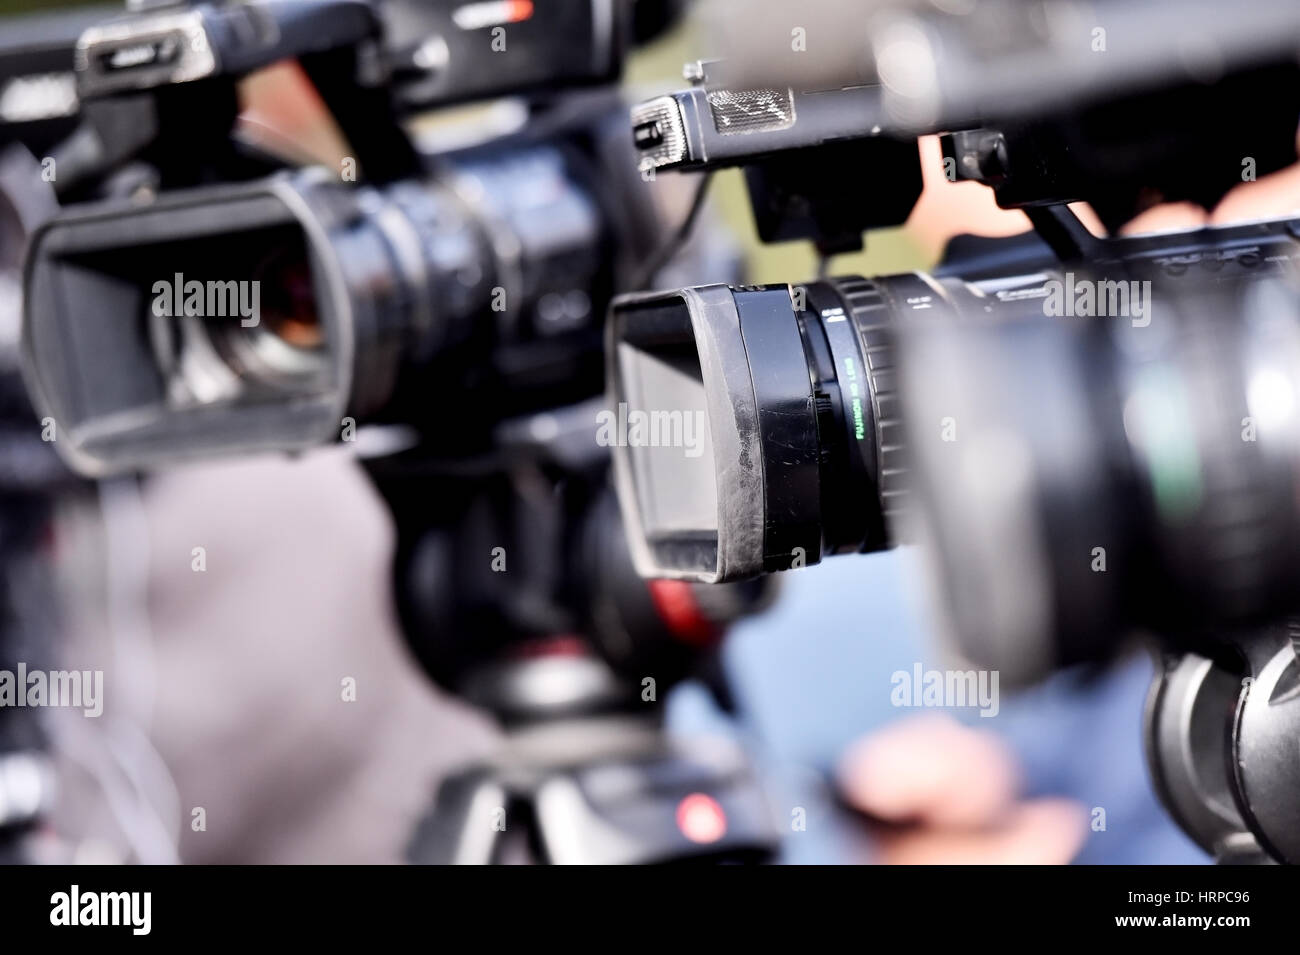 Lots of television cameras in a row broadcasting a live media event Stock Photo